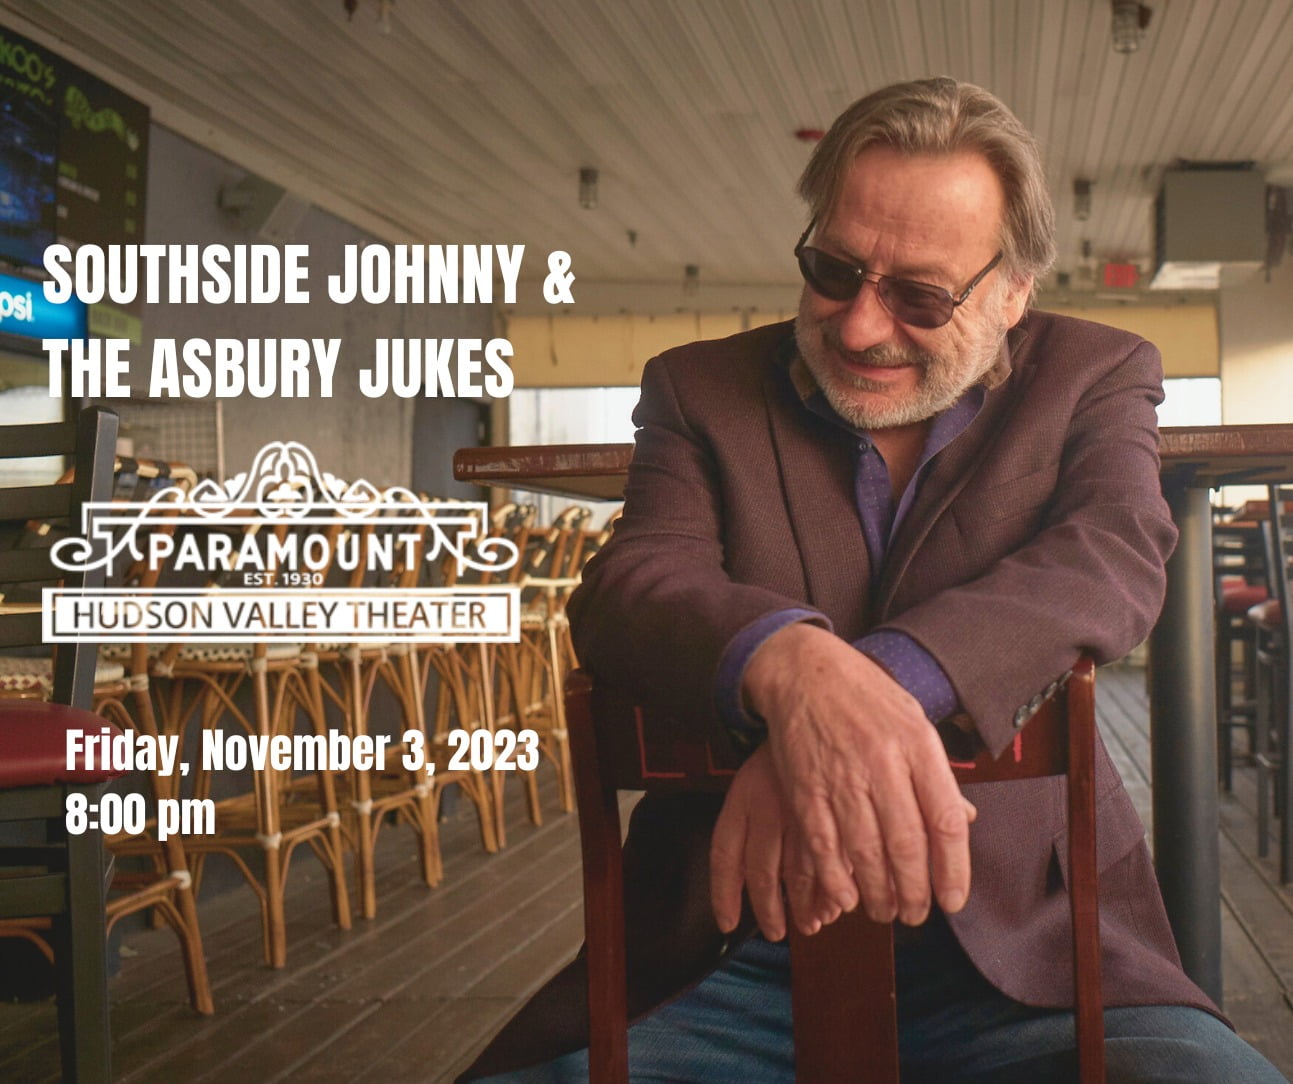 Flier for Southside Johnny & the Asbury Jukes